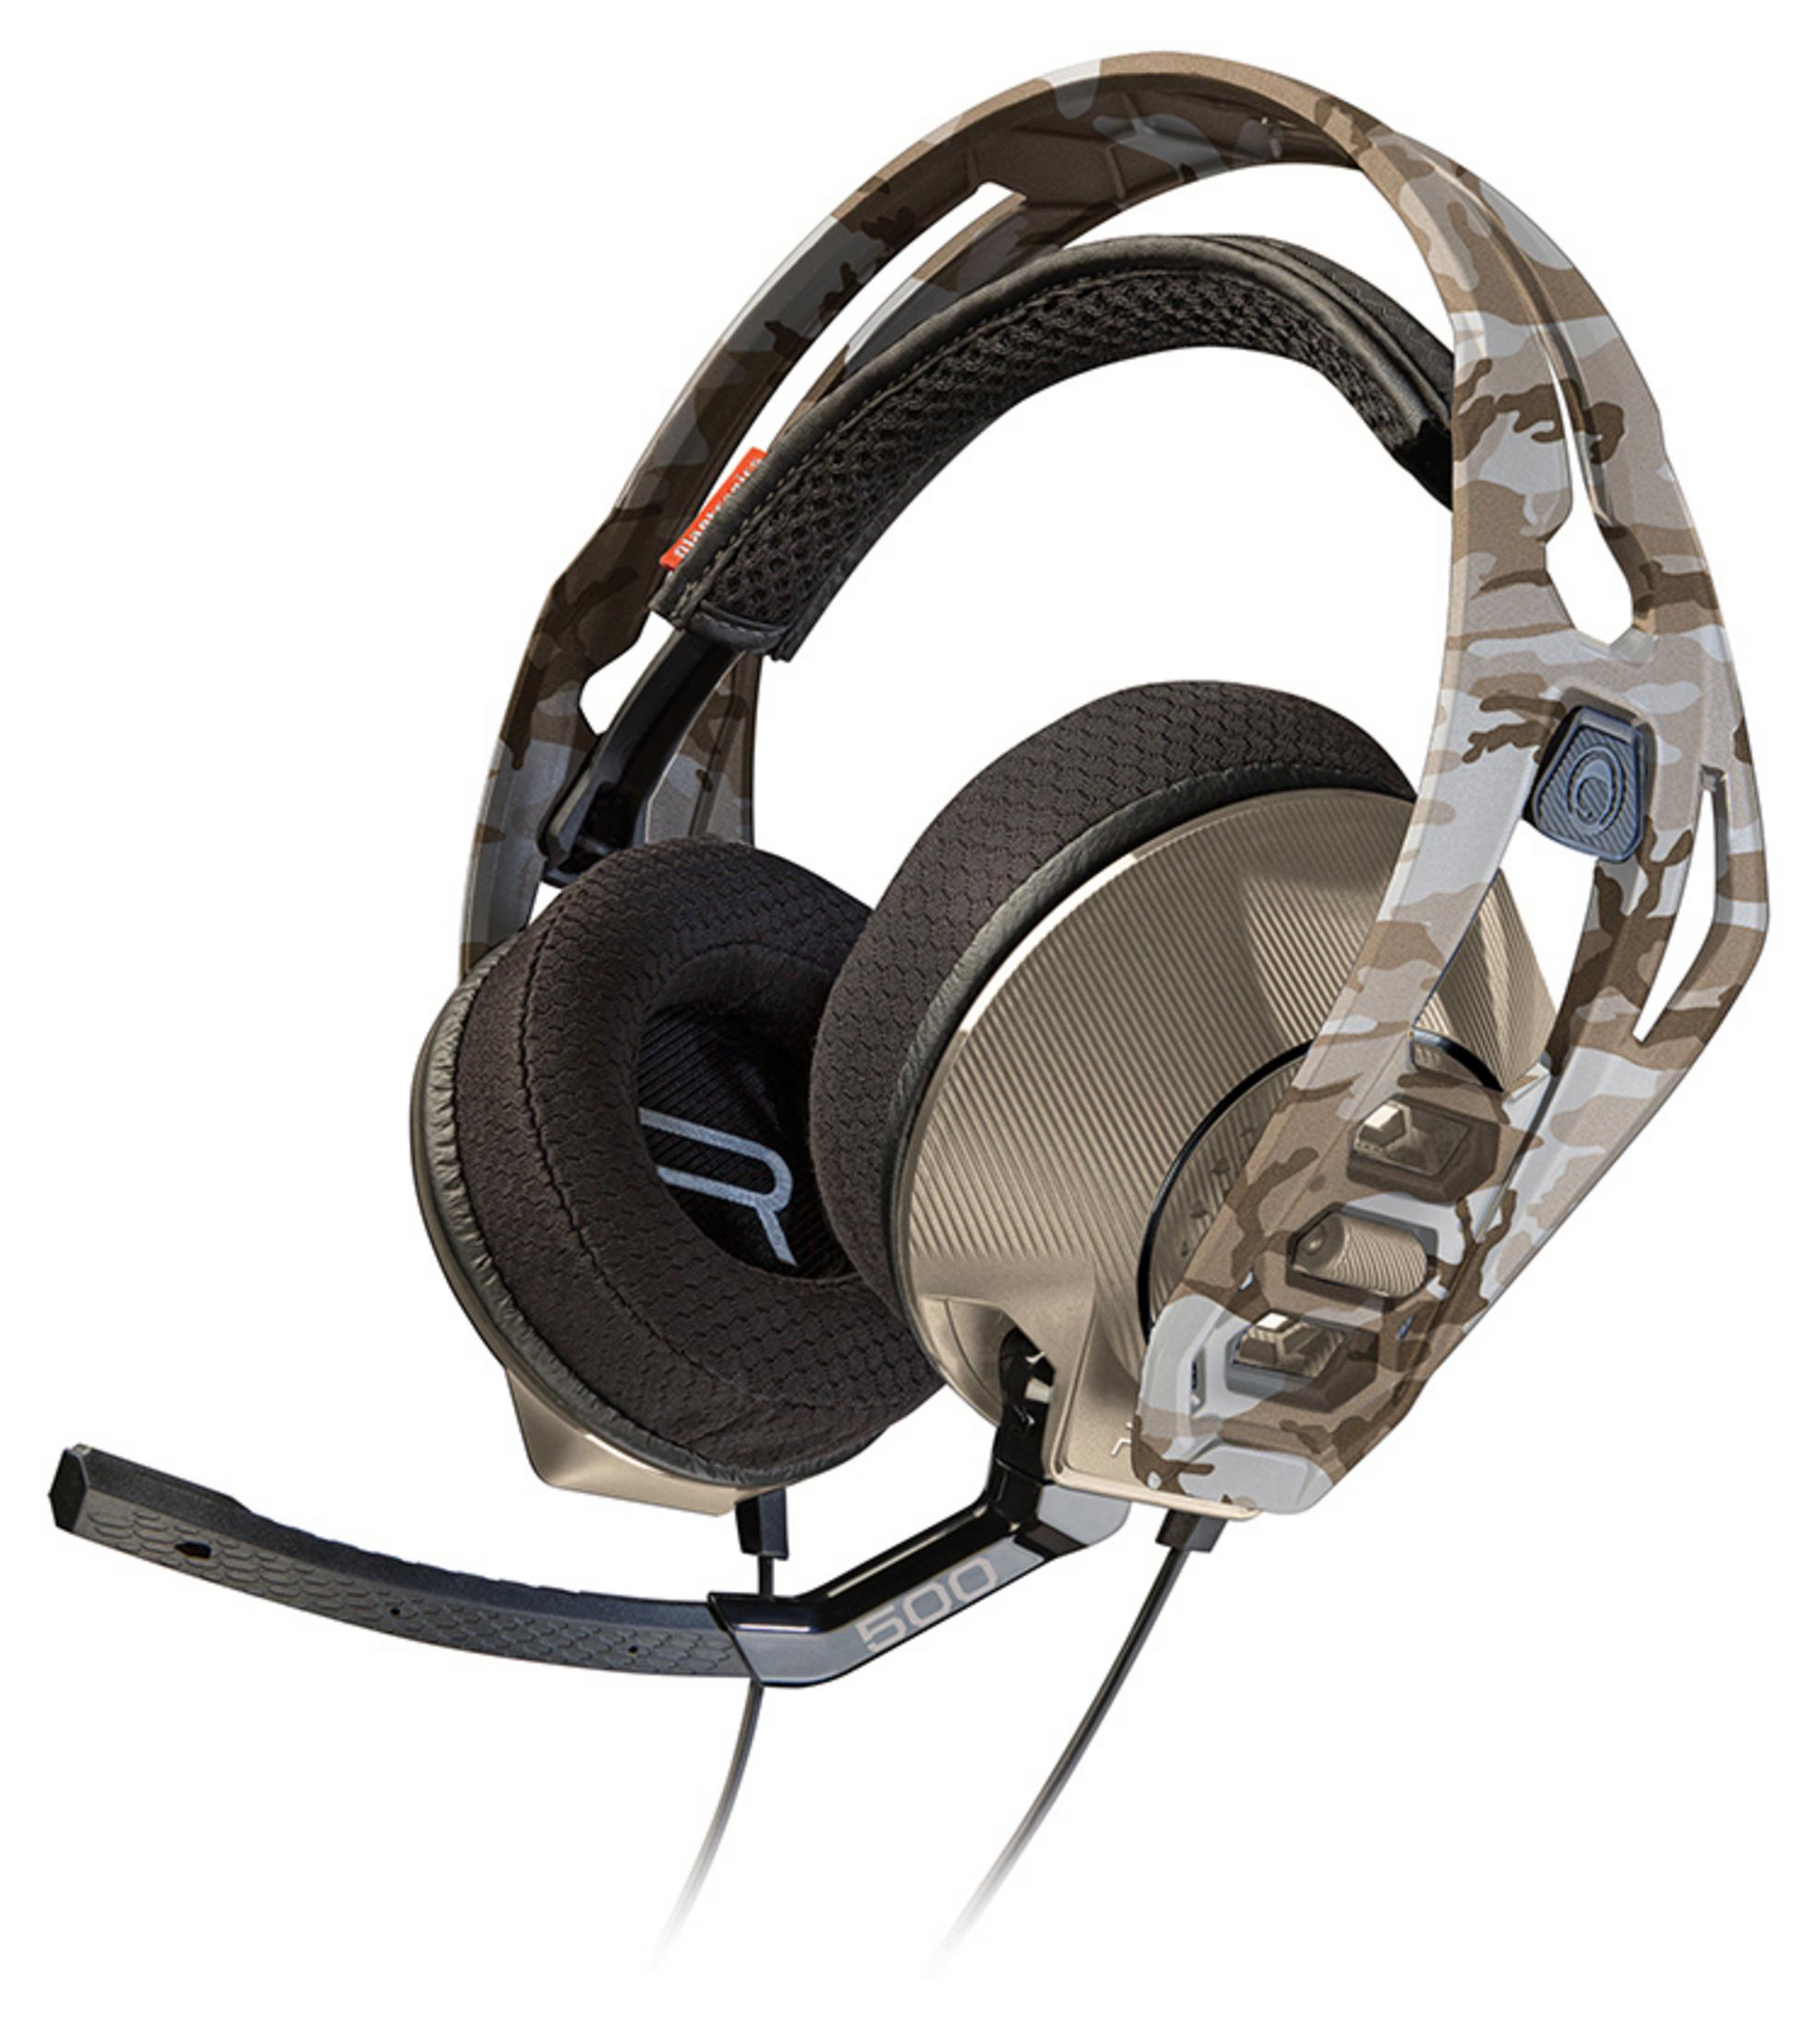 Headset 500 CAMO, PL047872 HX RIG Camouflage NACON Over-ear